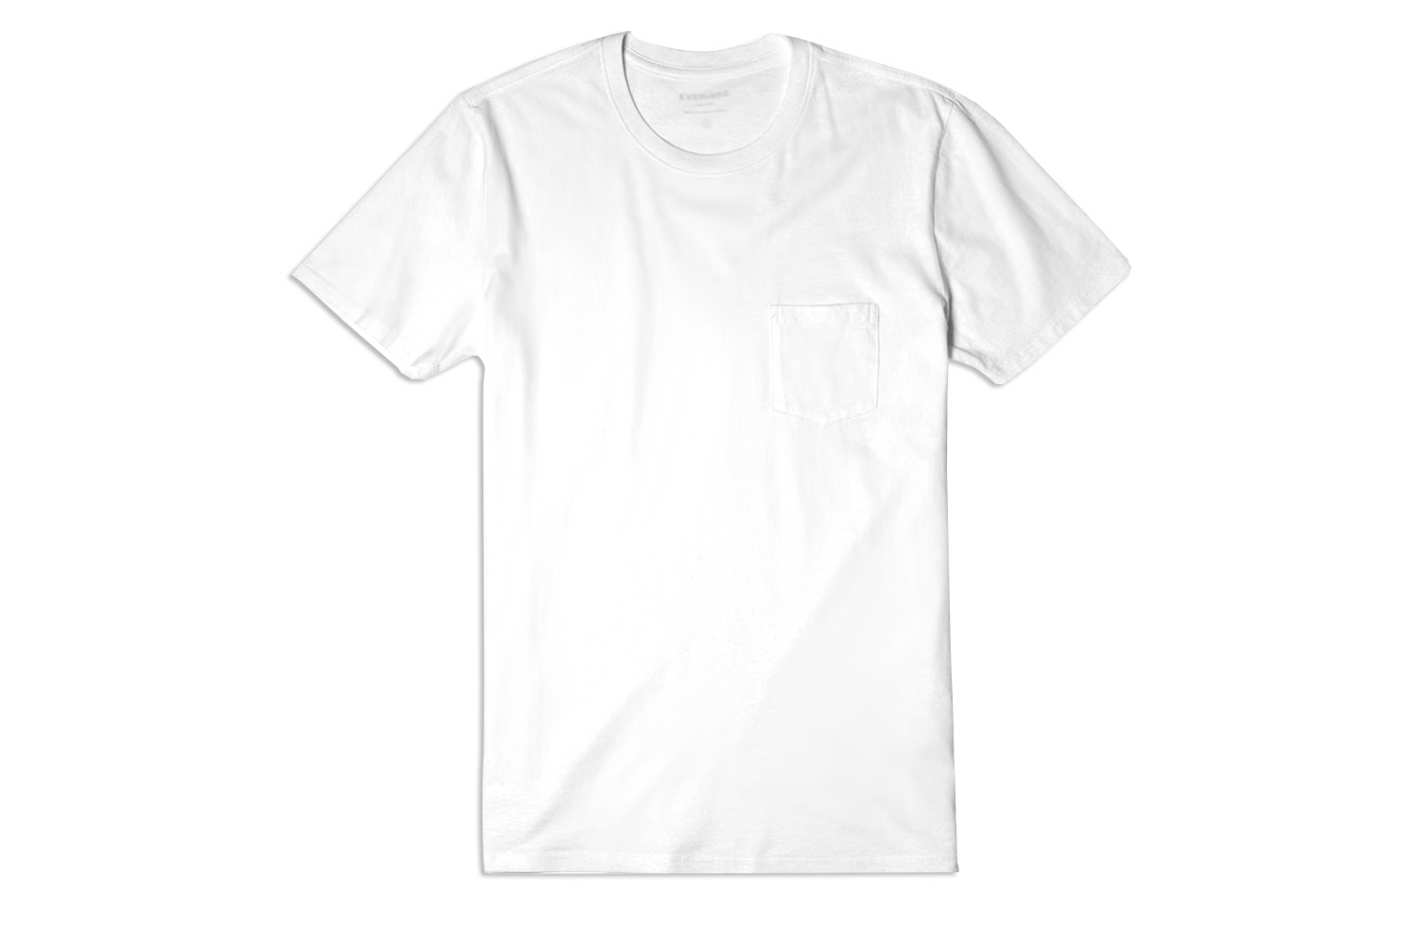 white t shirt u201cthe best white t-shirt for women is soft, works tucked or not, and strikes OAYCJTX